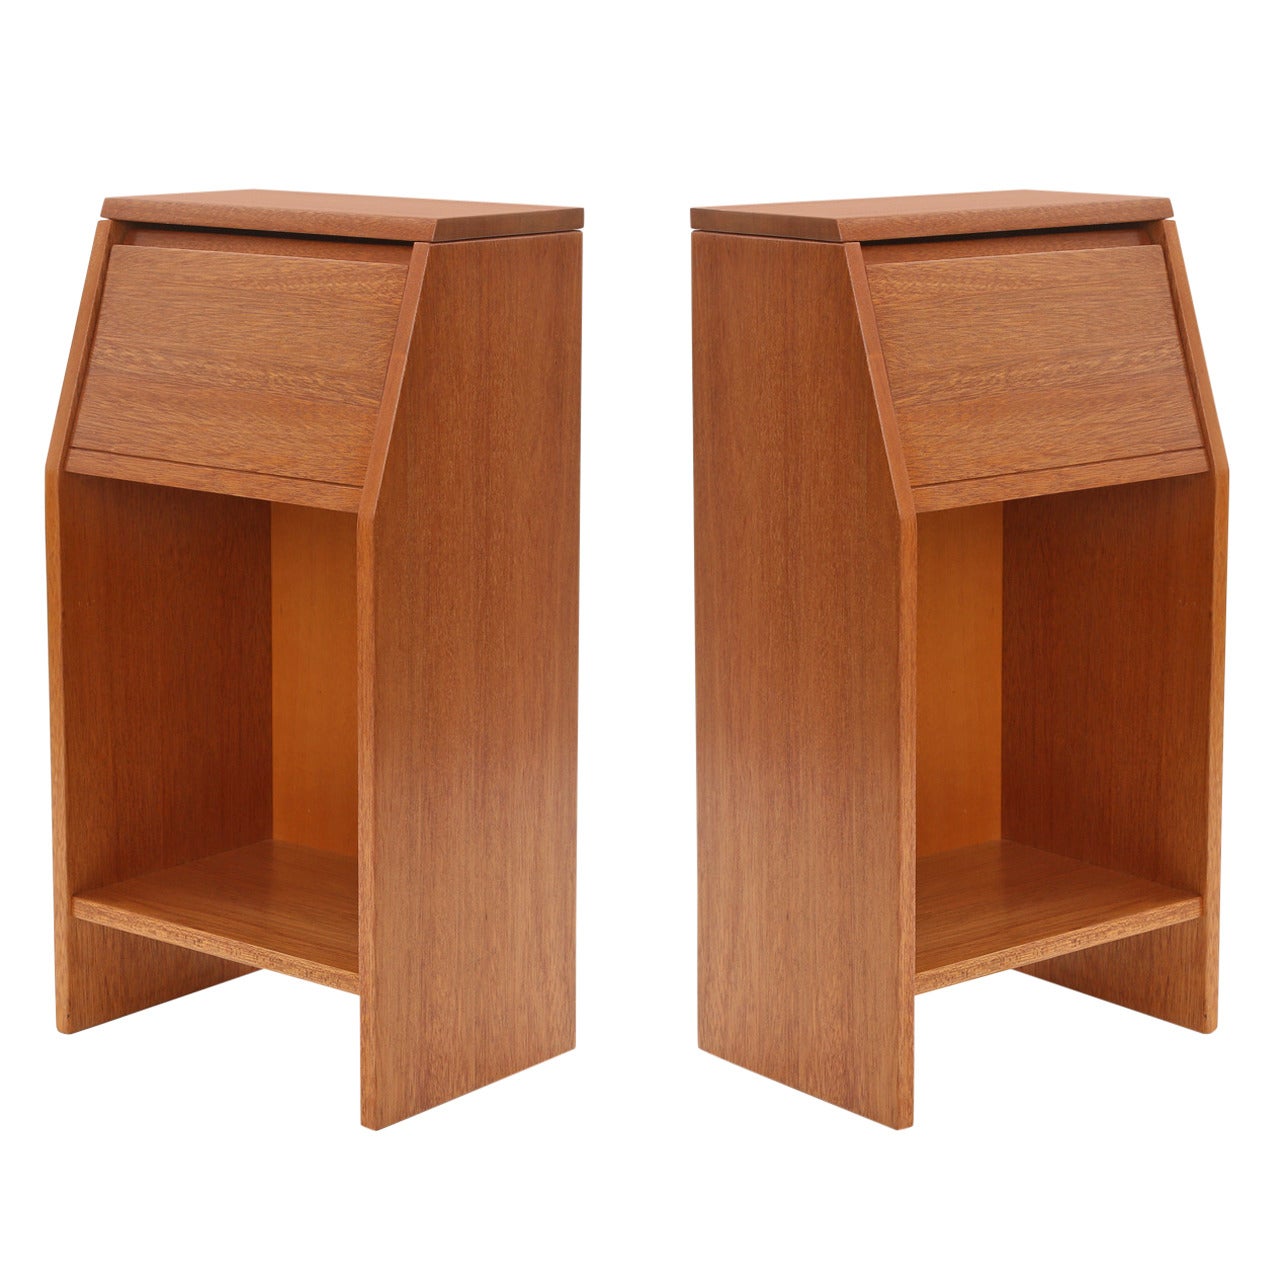 Pair of Striped African Mahogany Nightstands by Brown Saltman